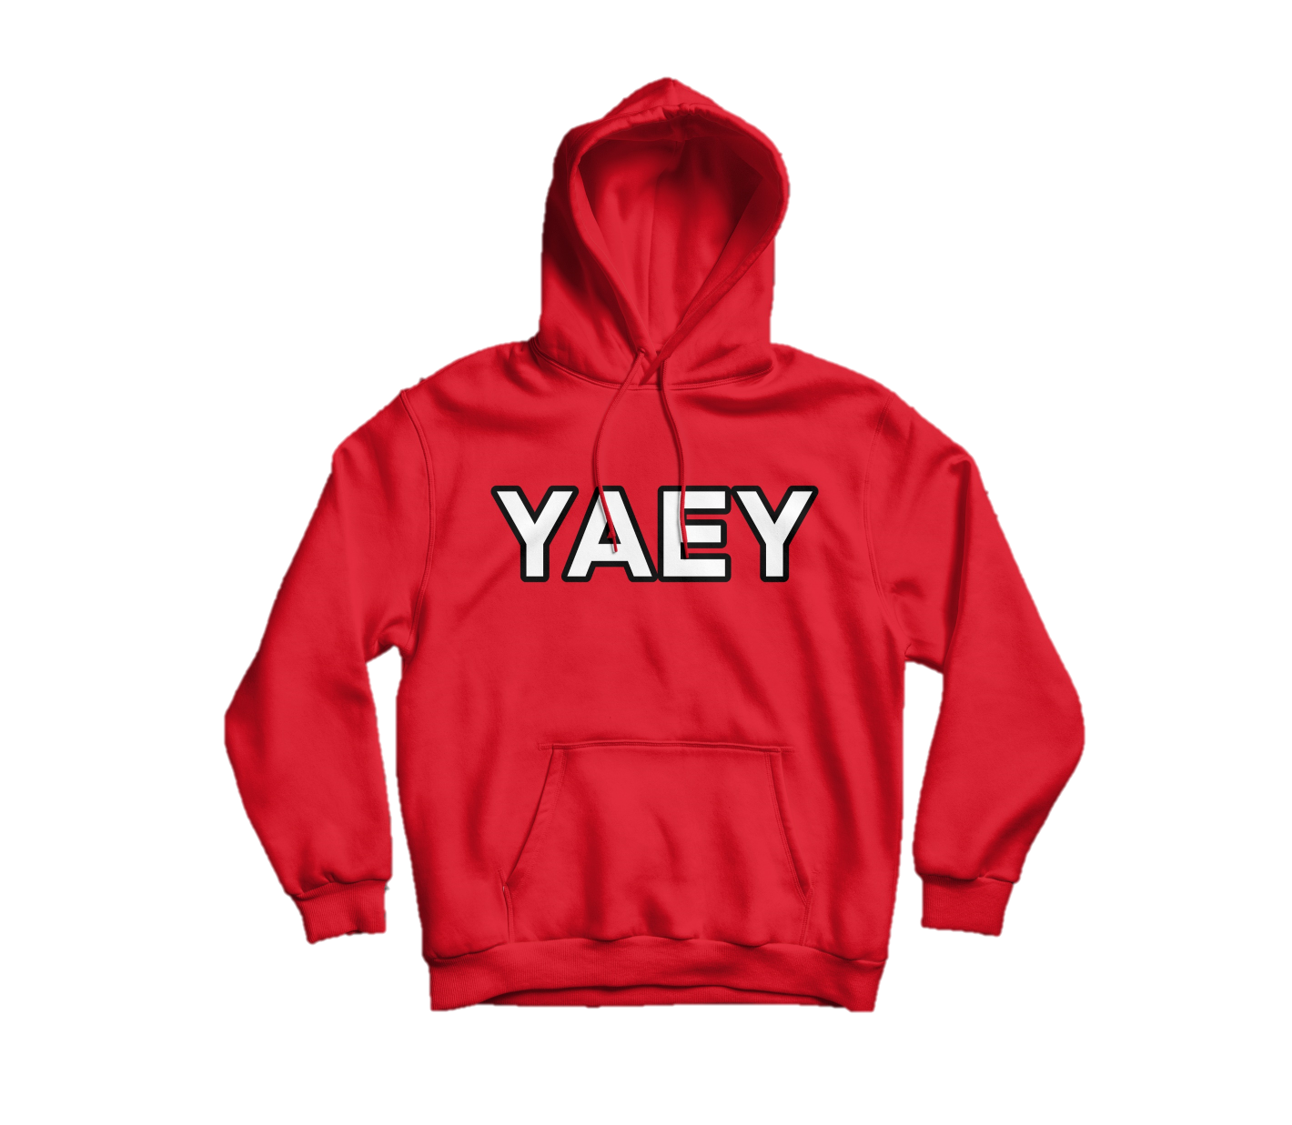 YAEY Hoodie - Please check the size at the size chart YAEY!